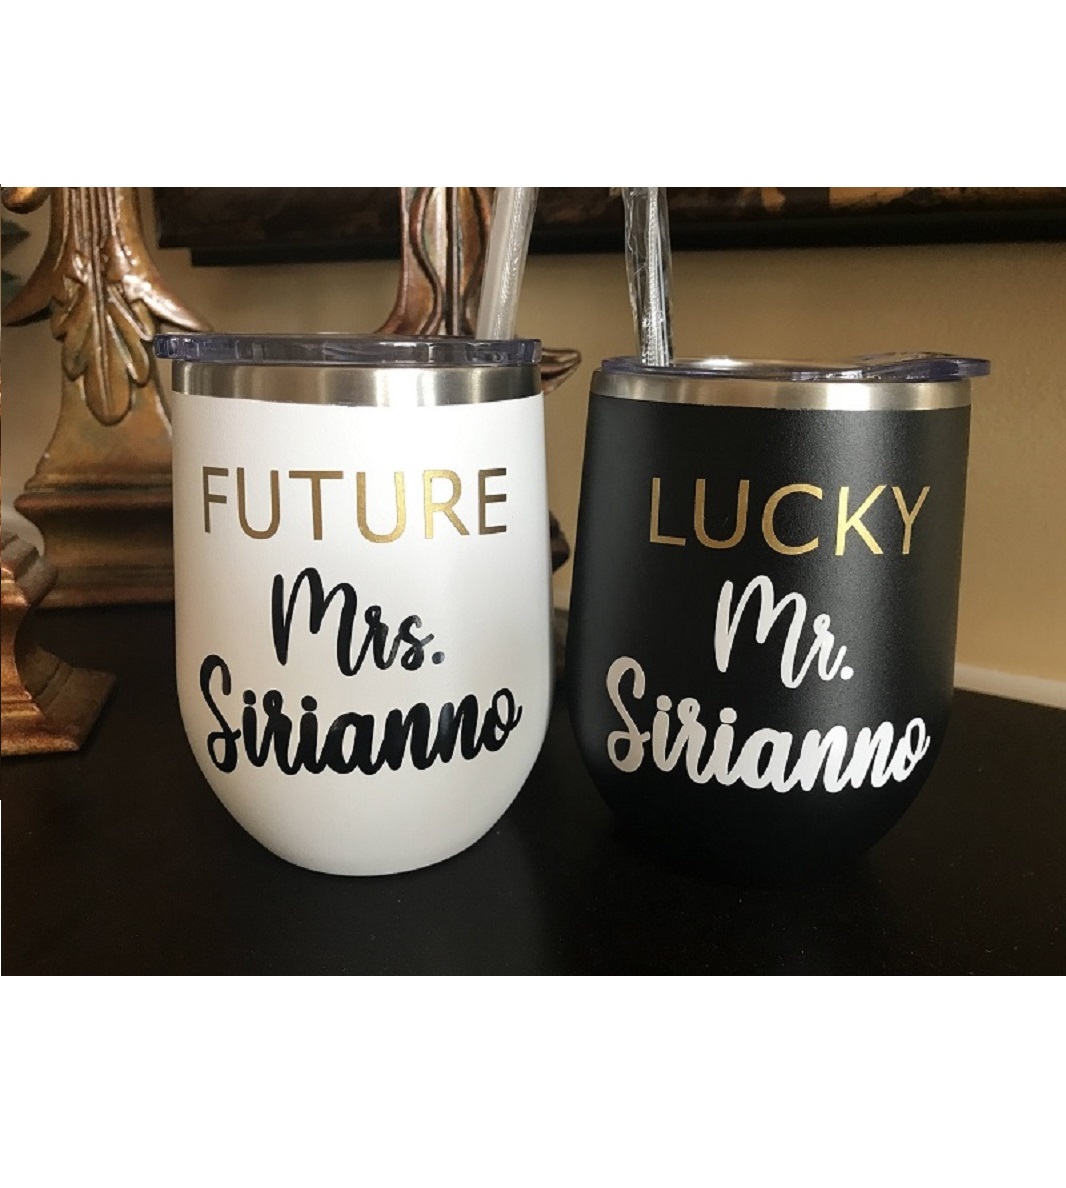 https://www.pattybzz.com/images/large/Future-Mrs-Lucky-Mr.JPG